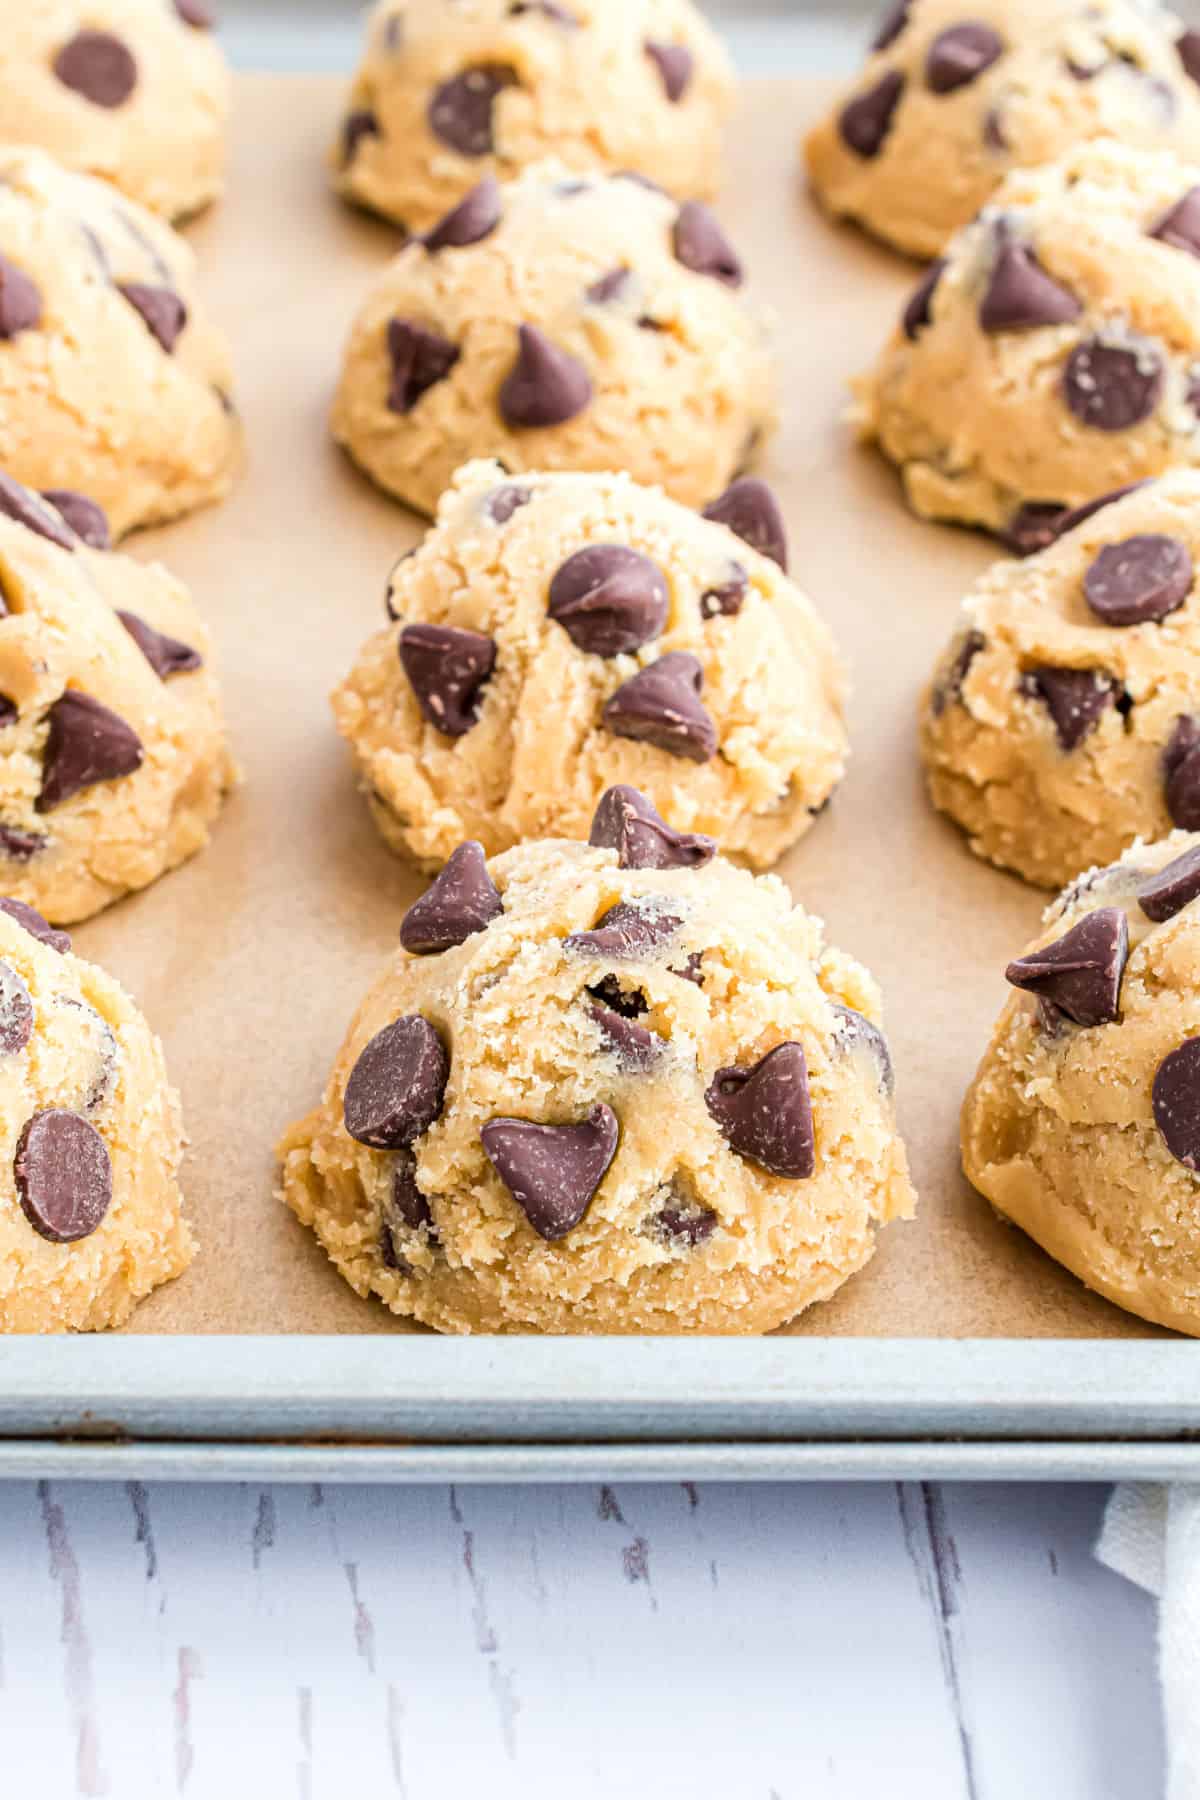 Chocolate chip cookie dough on parchment paper lined cookie sheet for freezing.